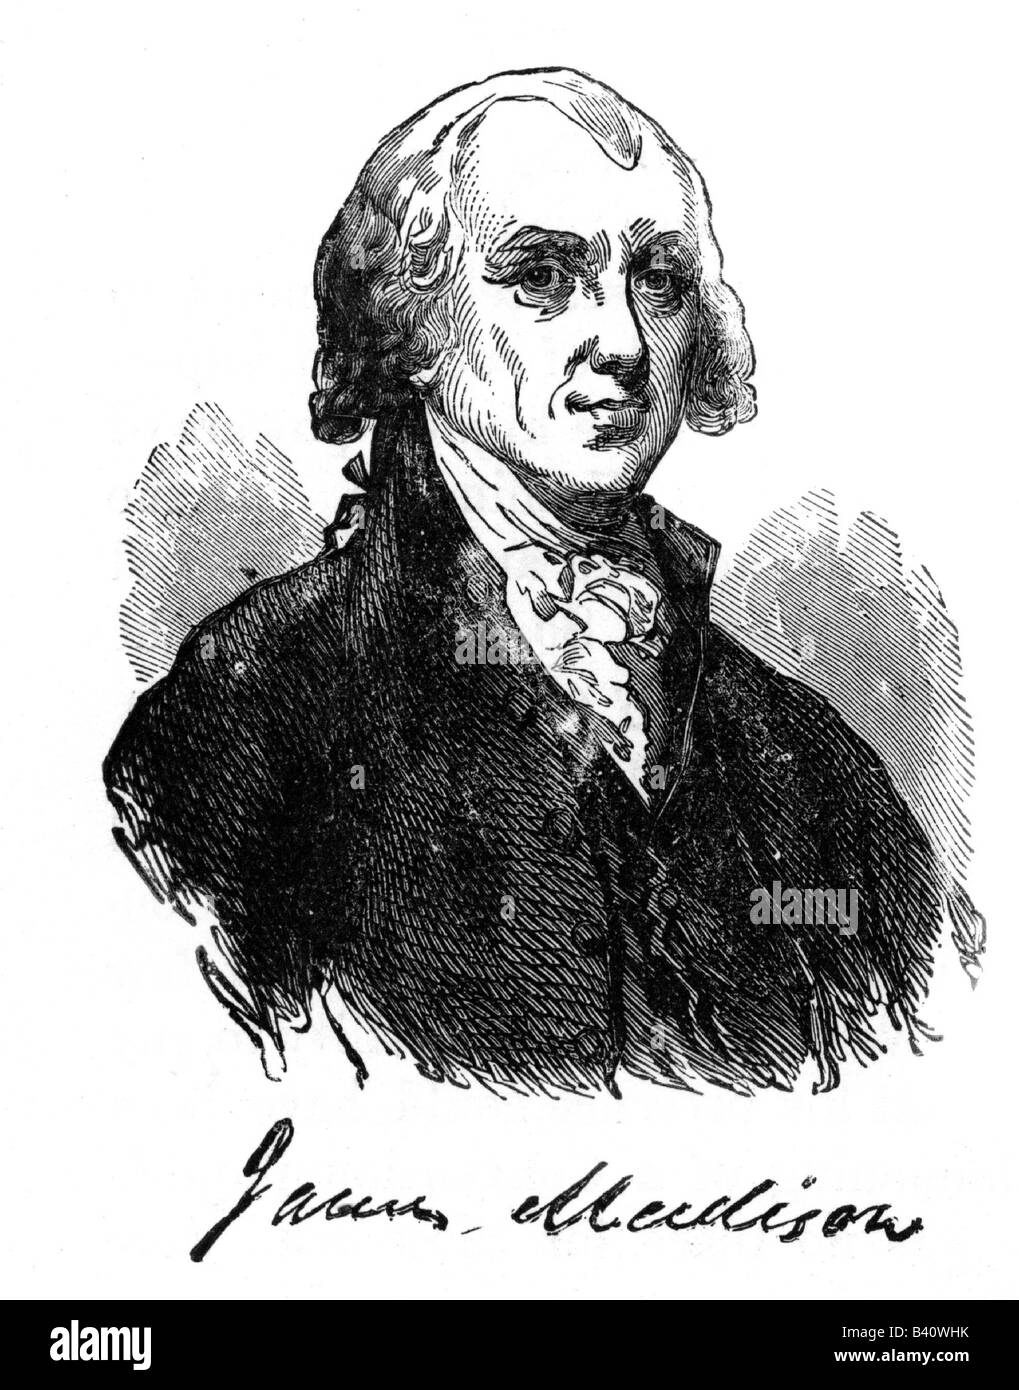 Madison, James, 16.3.1751 - 28.6.1836, American politician (Dem.- Rep.), 4th President of the United States 4.3.1809 - 4.3.1817, portrait, wood engraving, 19th century, , Stock Photo